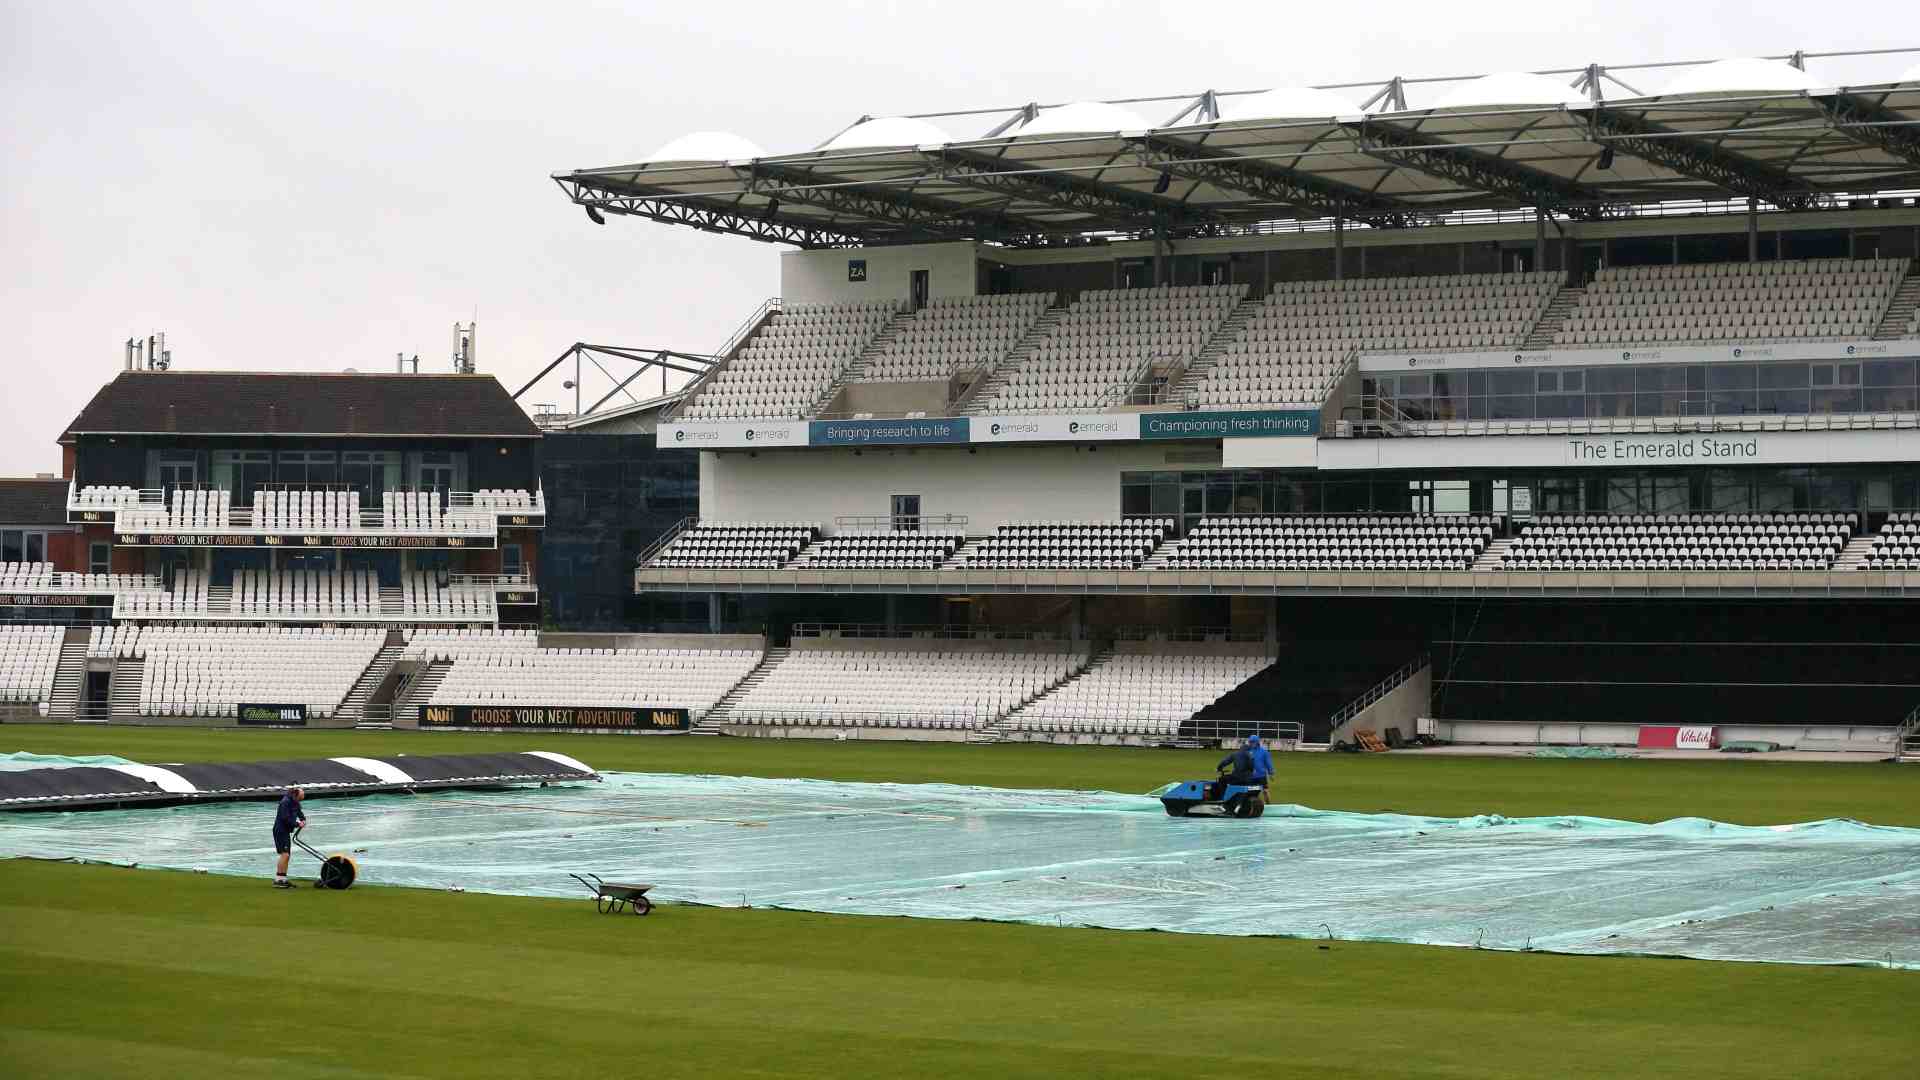 Covers used to cover the cricket pitch while raining, Image credit: Twitter